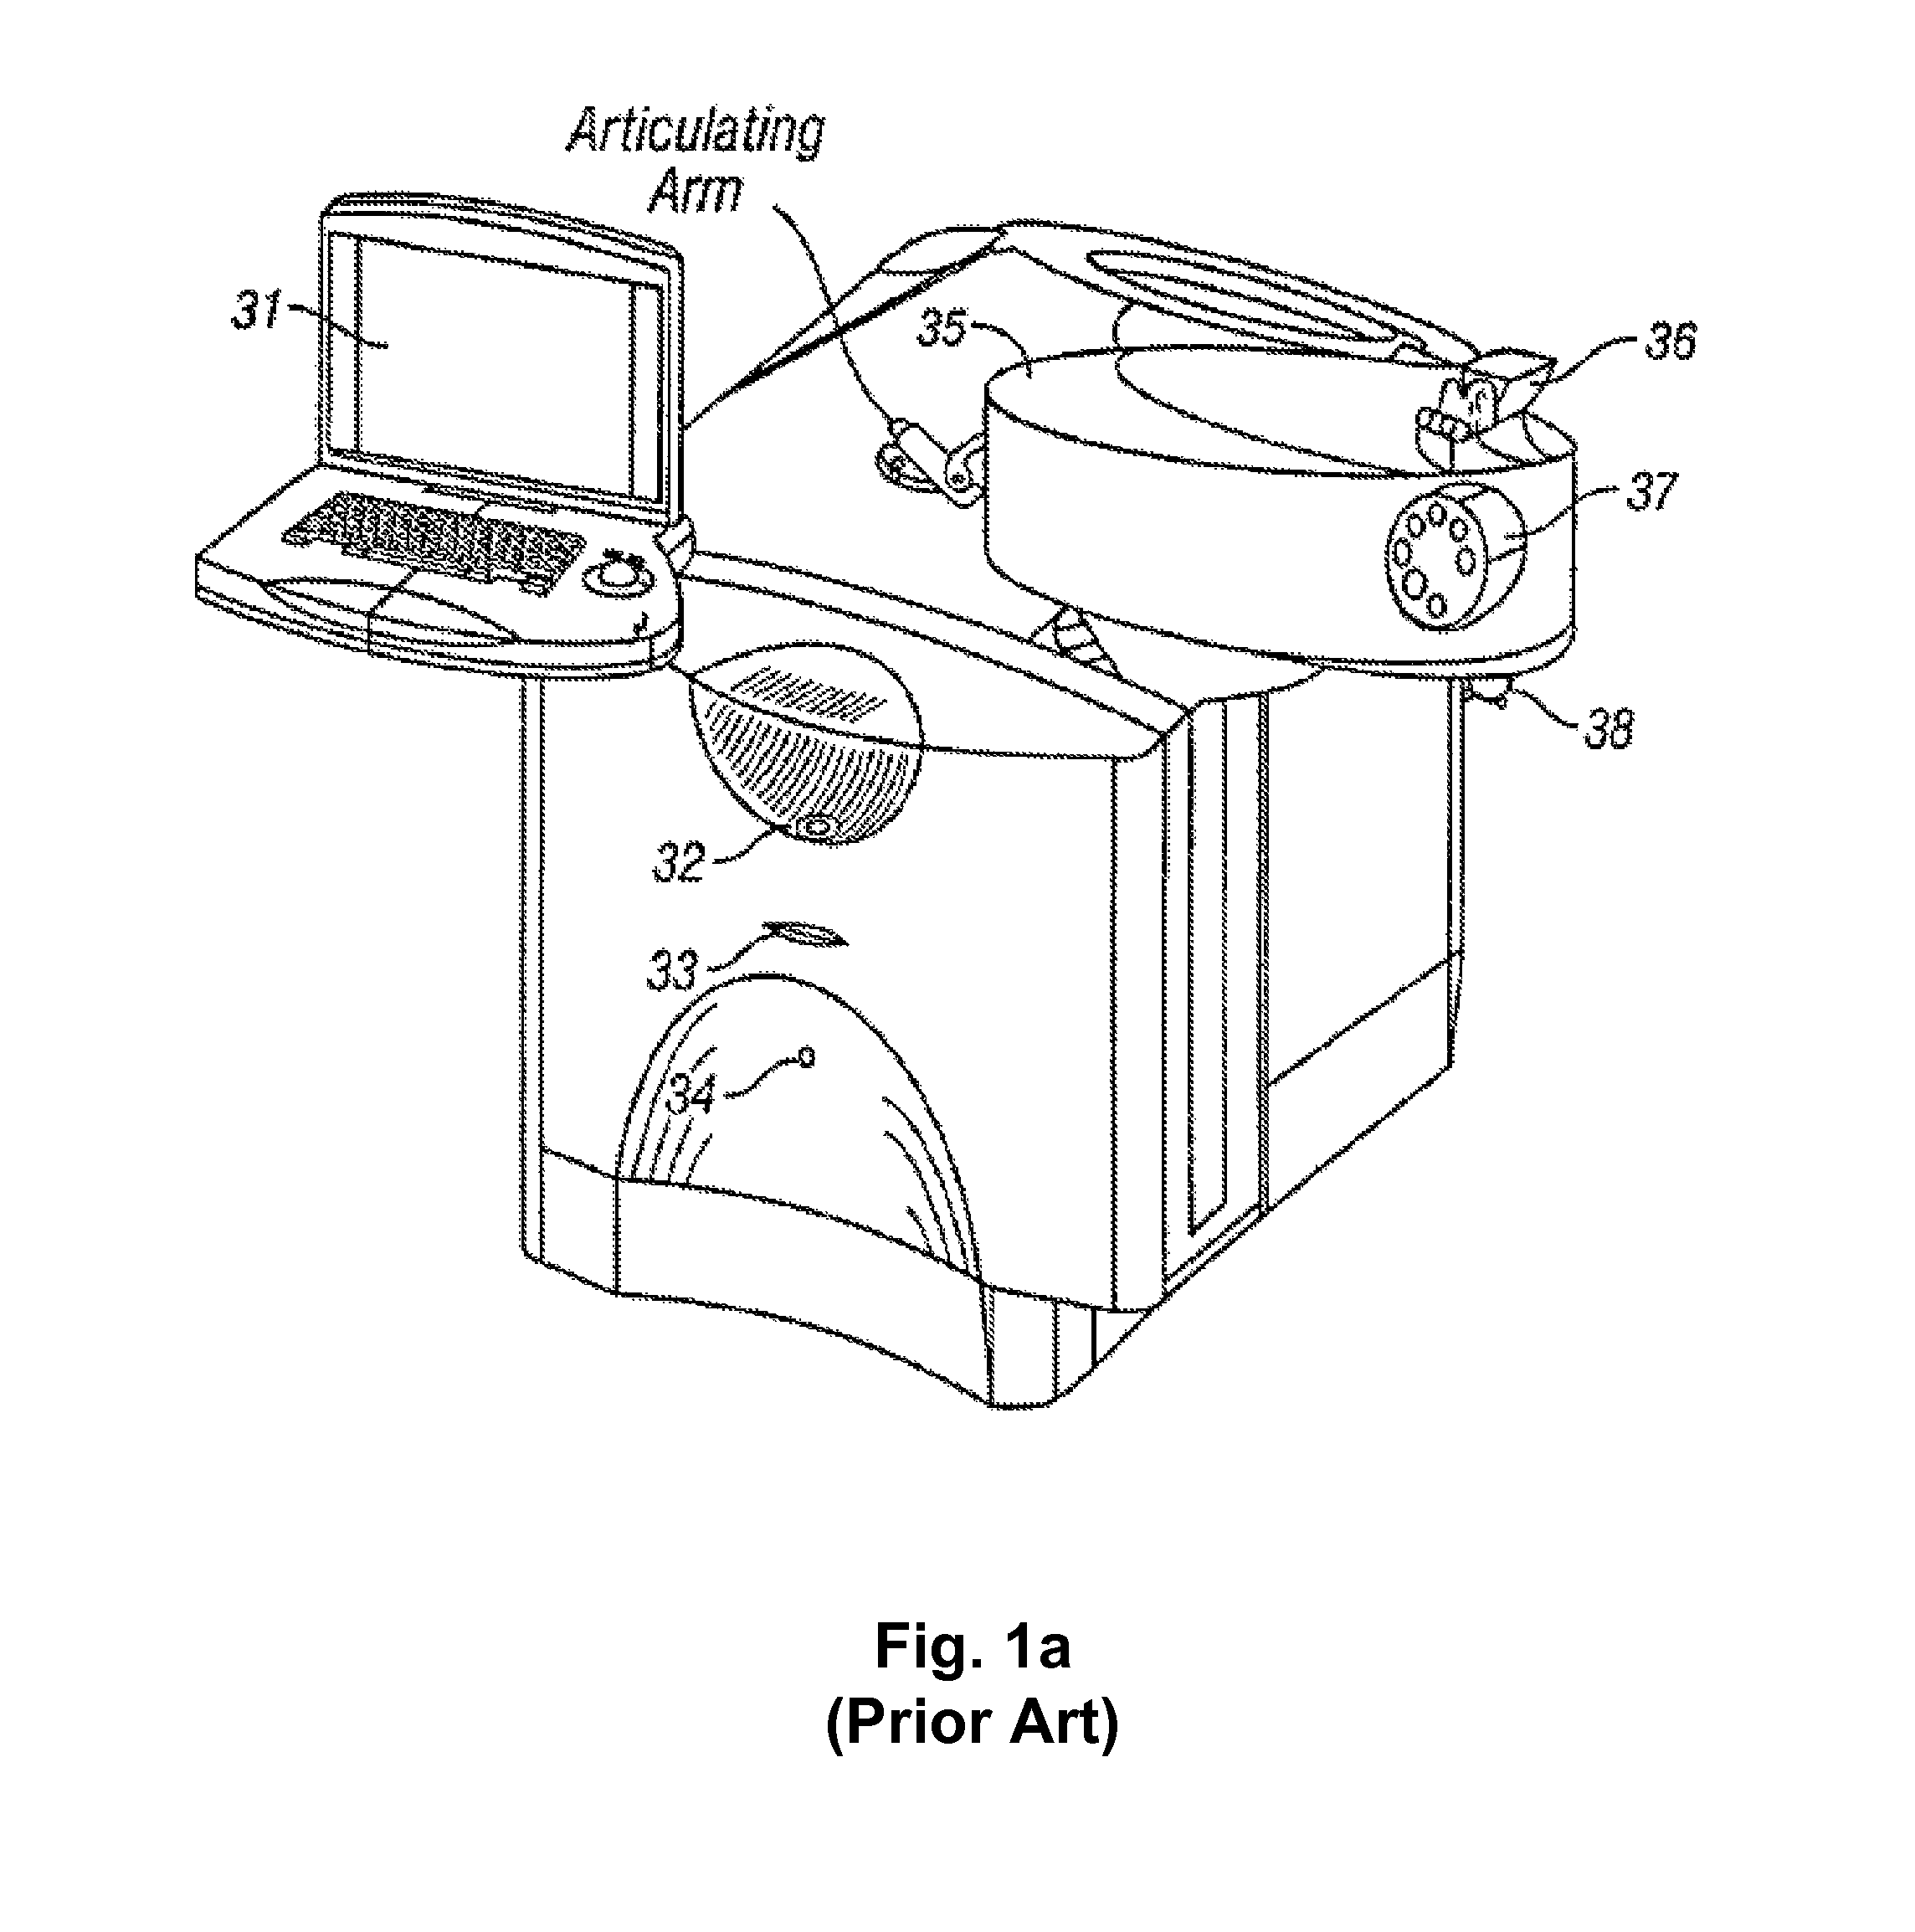 Systems and methods for providing remote diagnostics and support for surgical systems